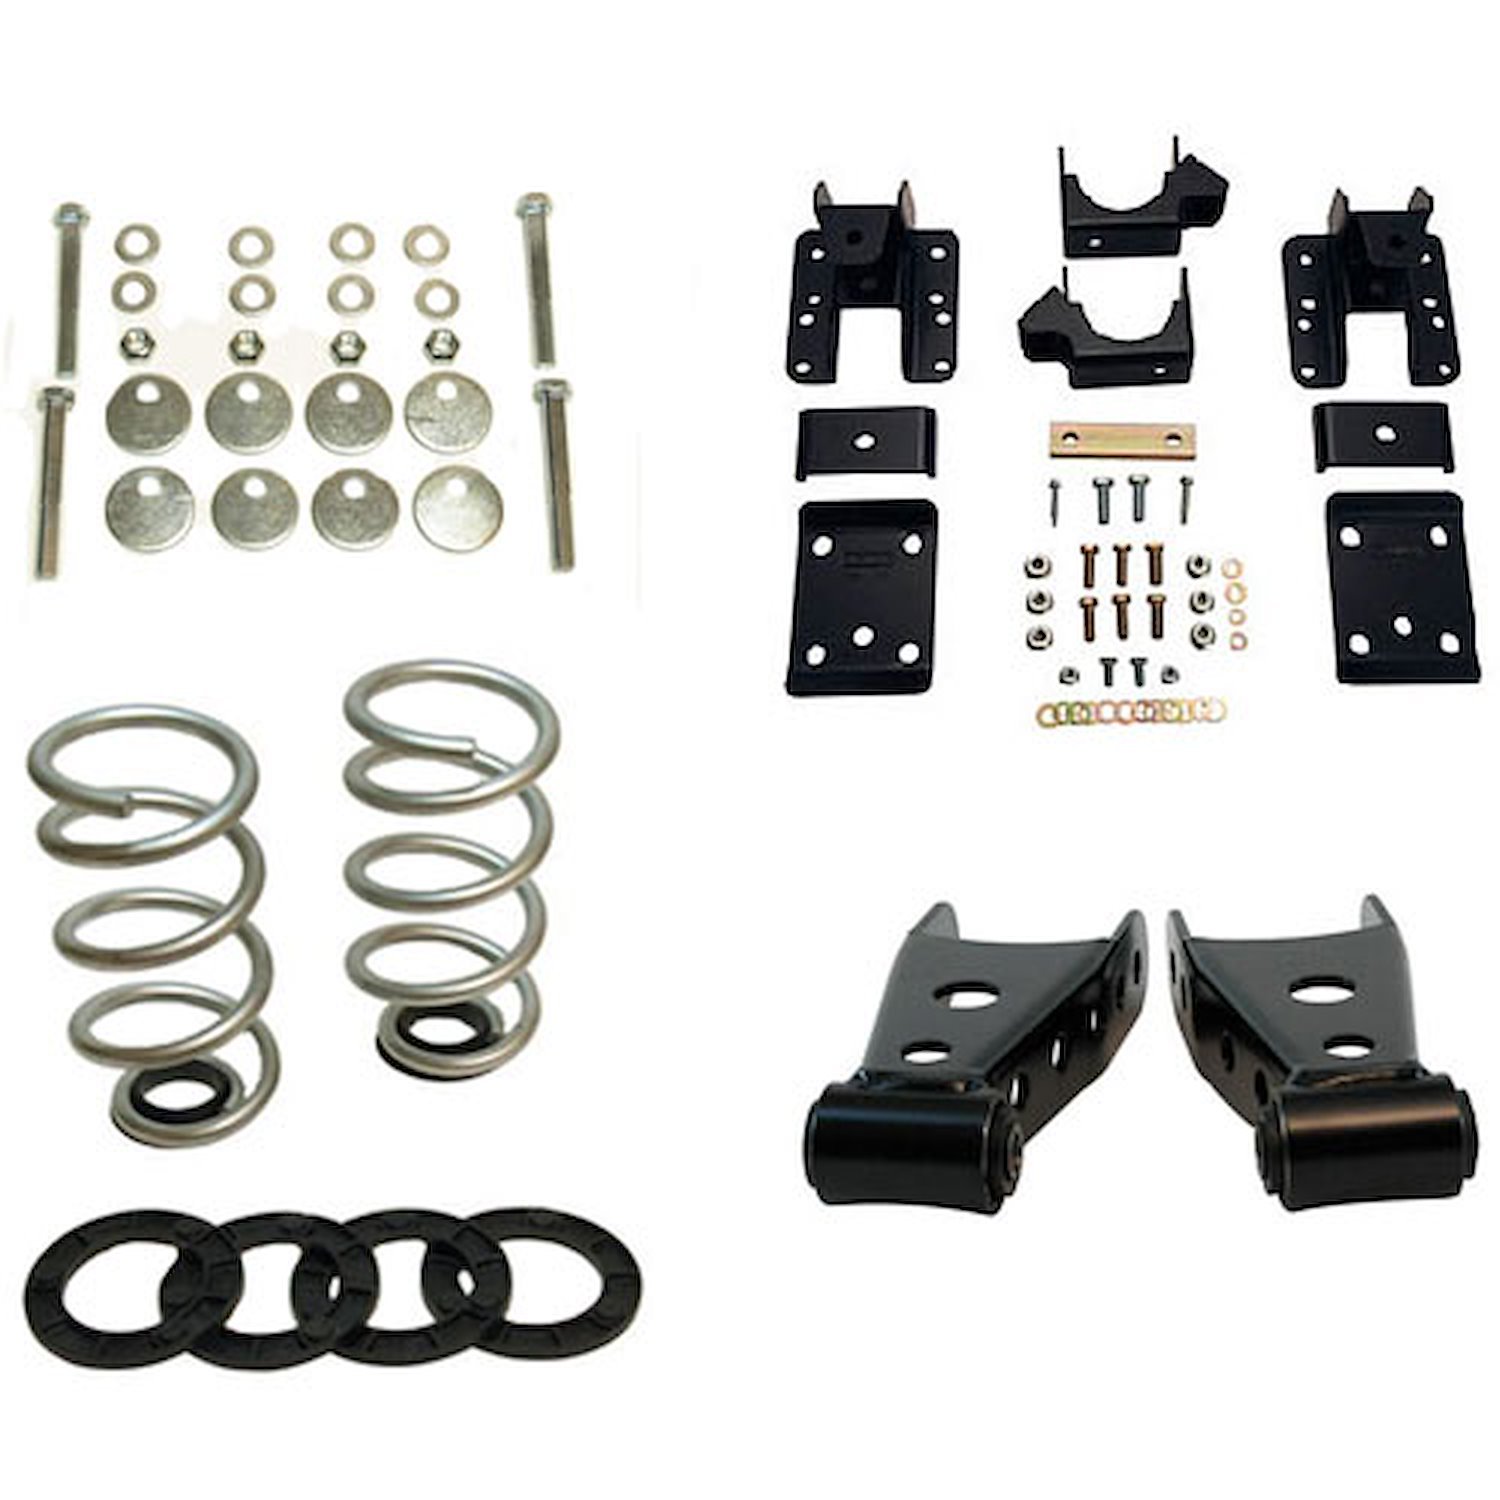 Complete Lowering Kit for 2007-2013 Chevy Silverado/GMC Sierra 1500 Extended Cab